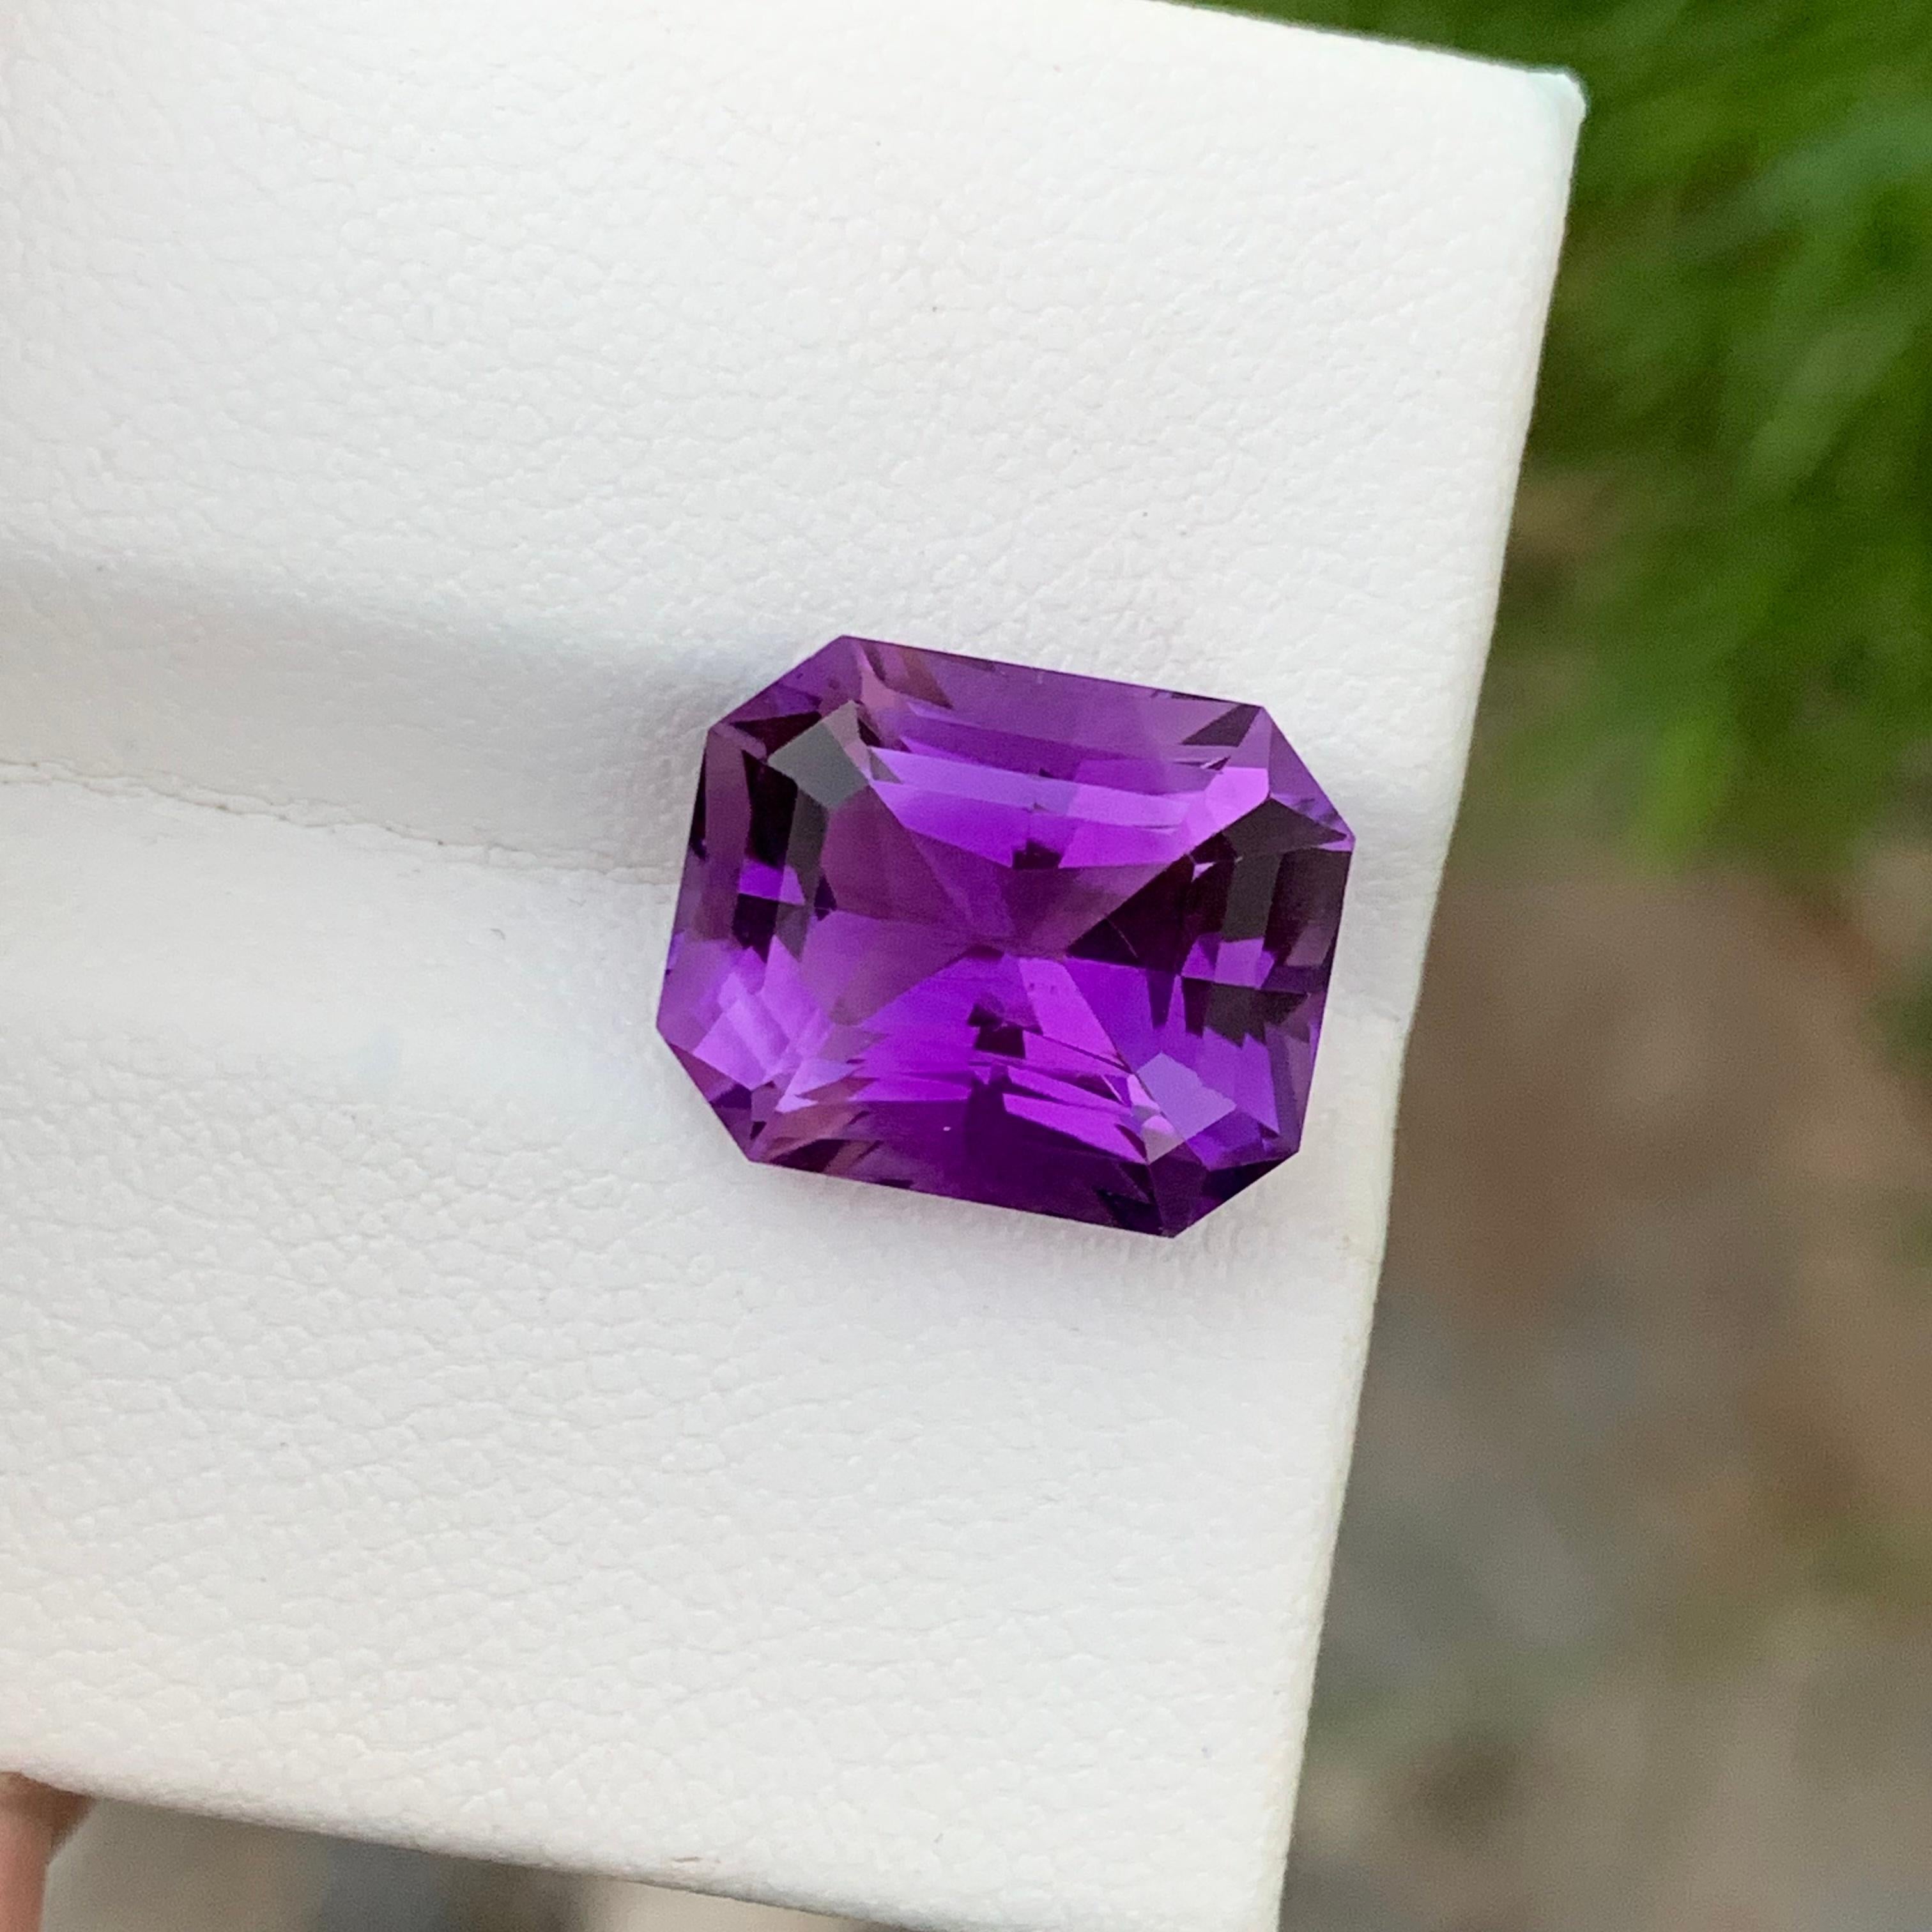 Faceted Amethyst 
Weight: 8.45 Carats 
Dimension: 13.6x11.1x8.7 Mm
Origin: Brazil
Color: Purple 
Shape: Emerald 
Certificate: On Customer Demand 
Amethyst is a beautiful purple variety of the mineral quartz, known for its striking color and